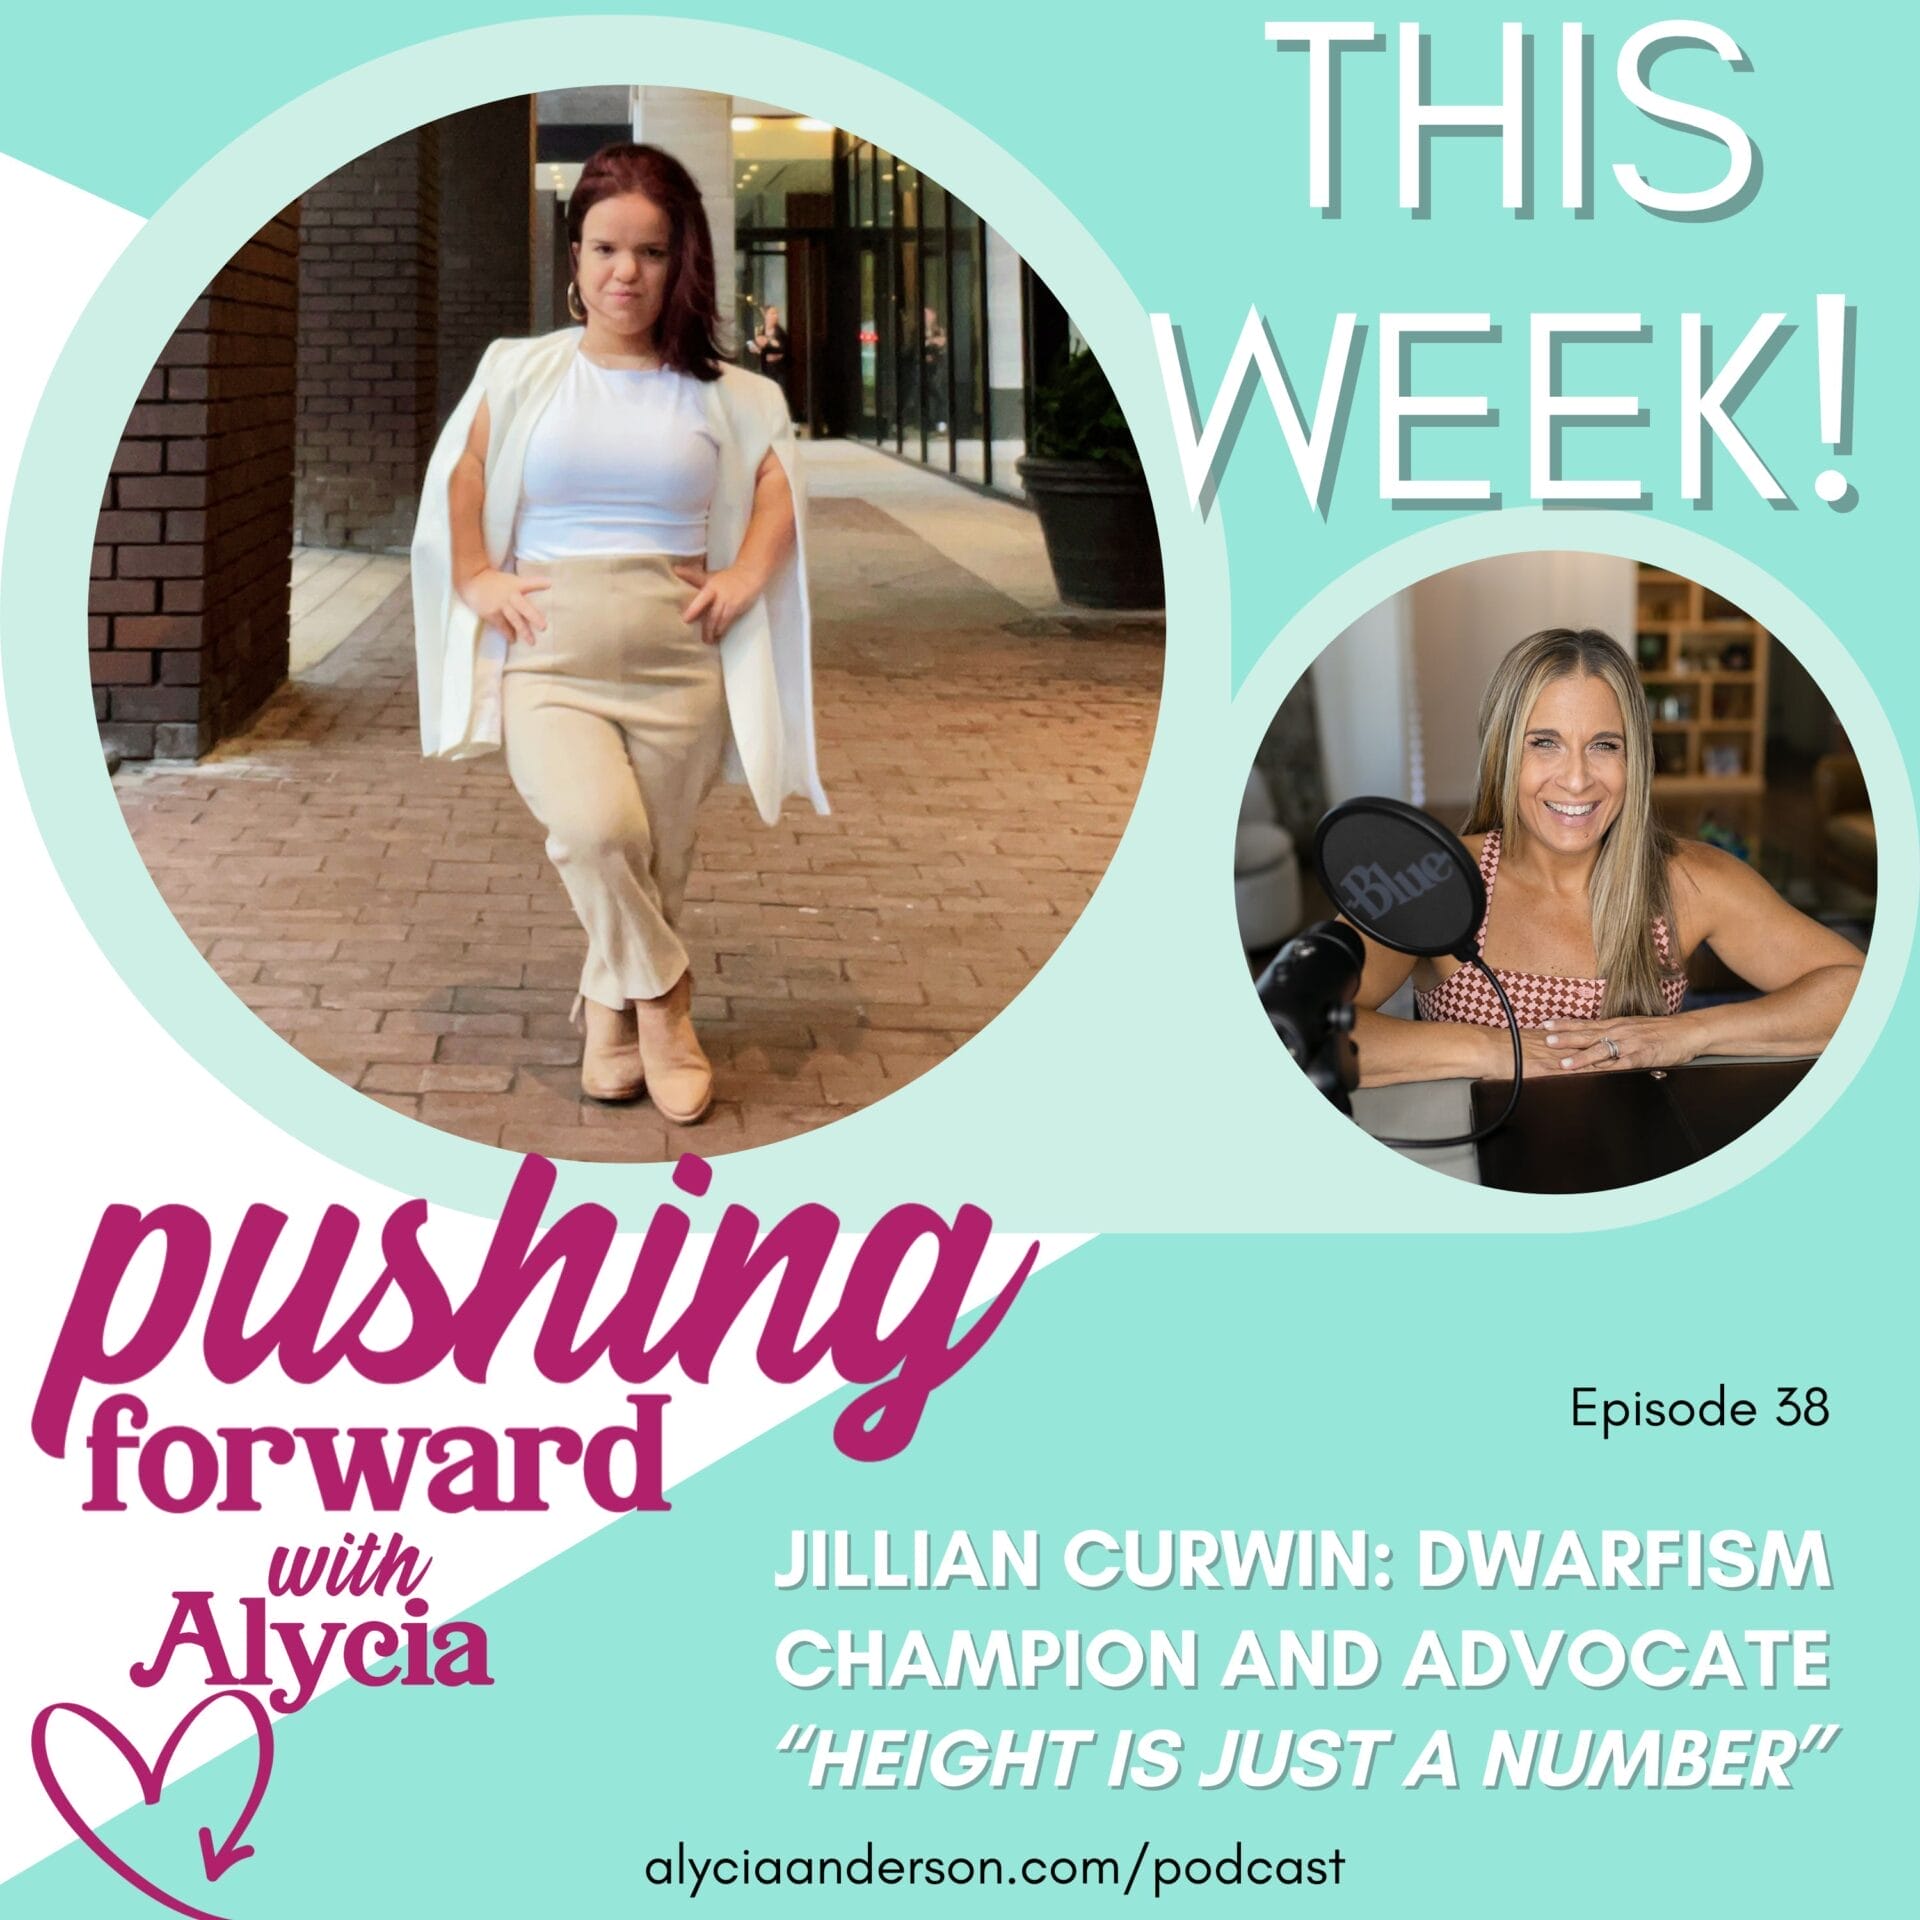 jillian curwin dwarfism champion and advocate joins us in episode thirty eight of pushing forward with alycia